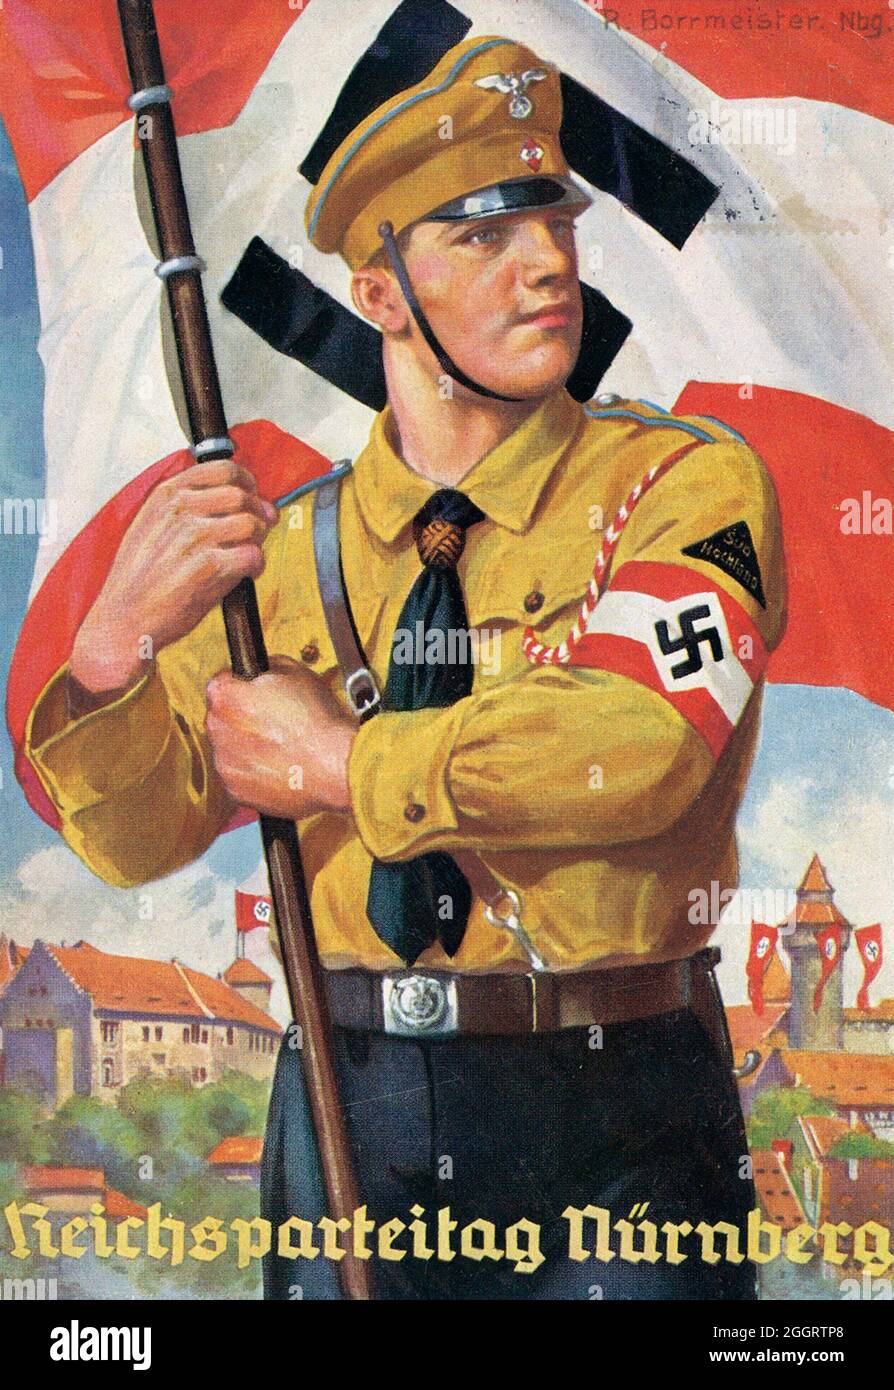 A vintage poster for the annual Nazi Nuremberg Rally showing a uniformed member of the Hitler Youth (Hitler-Jugend, HJ) Stock Photo